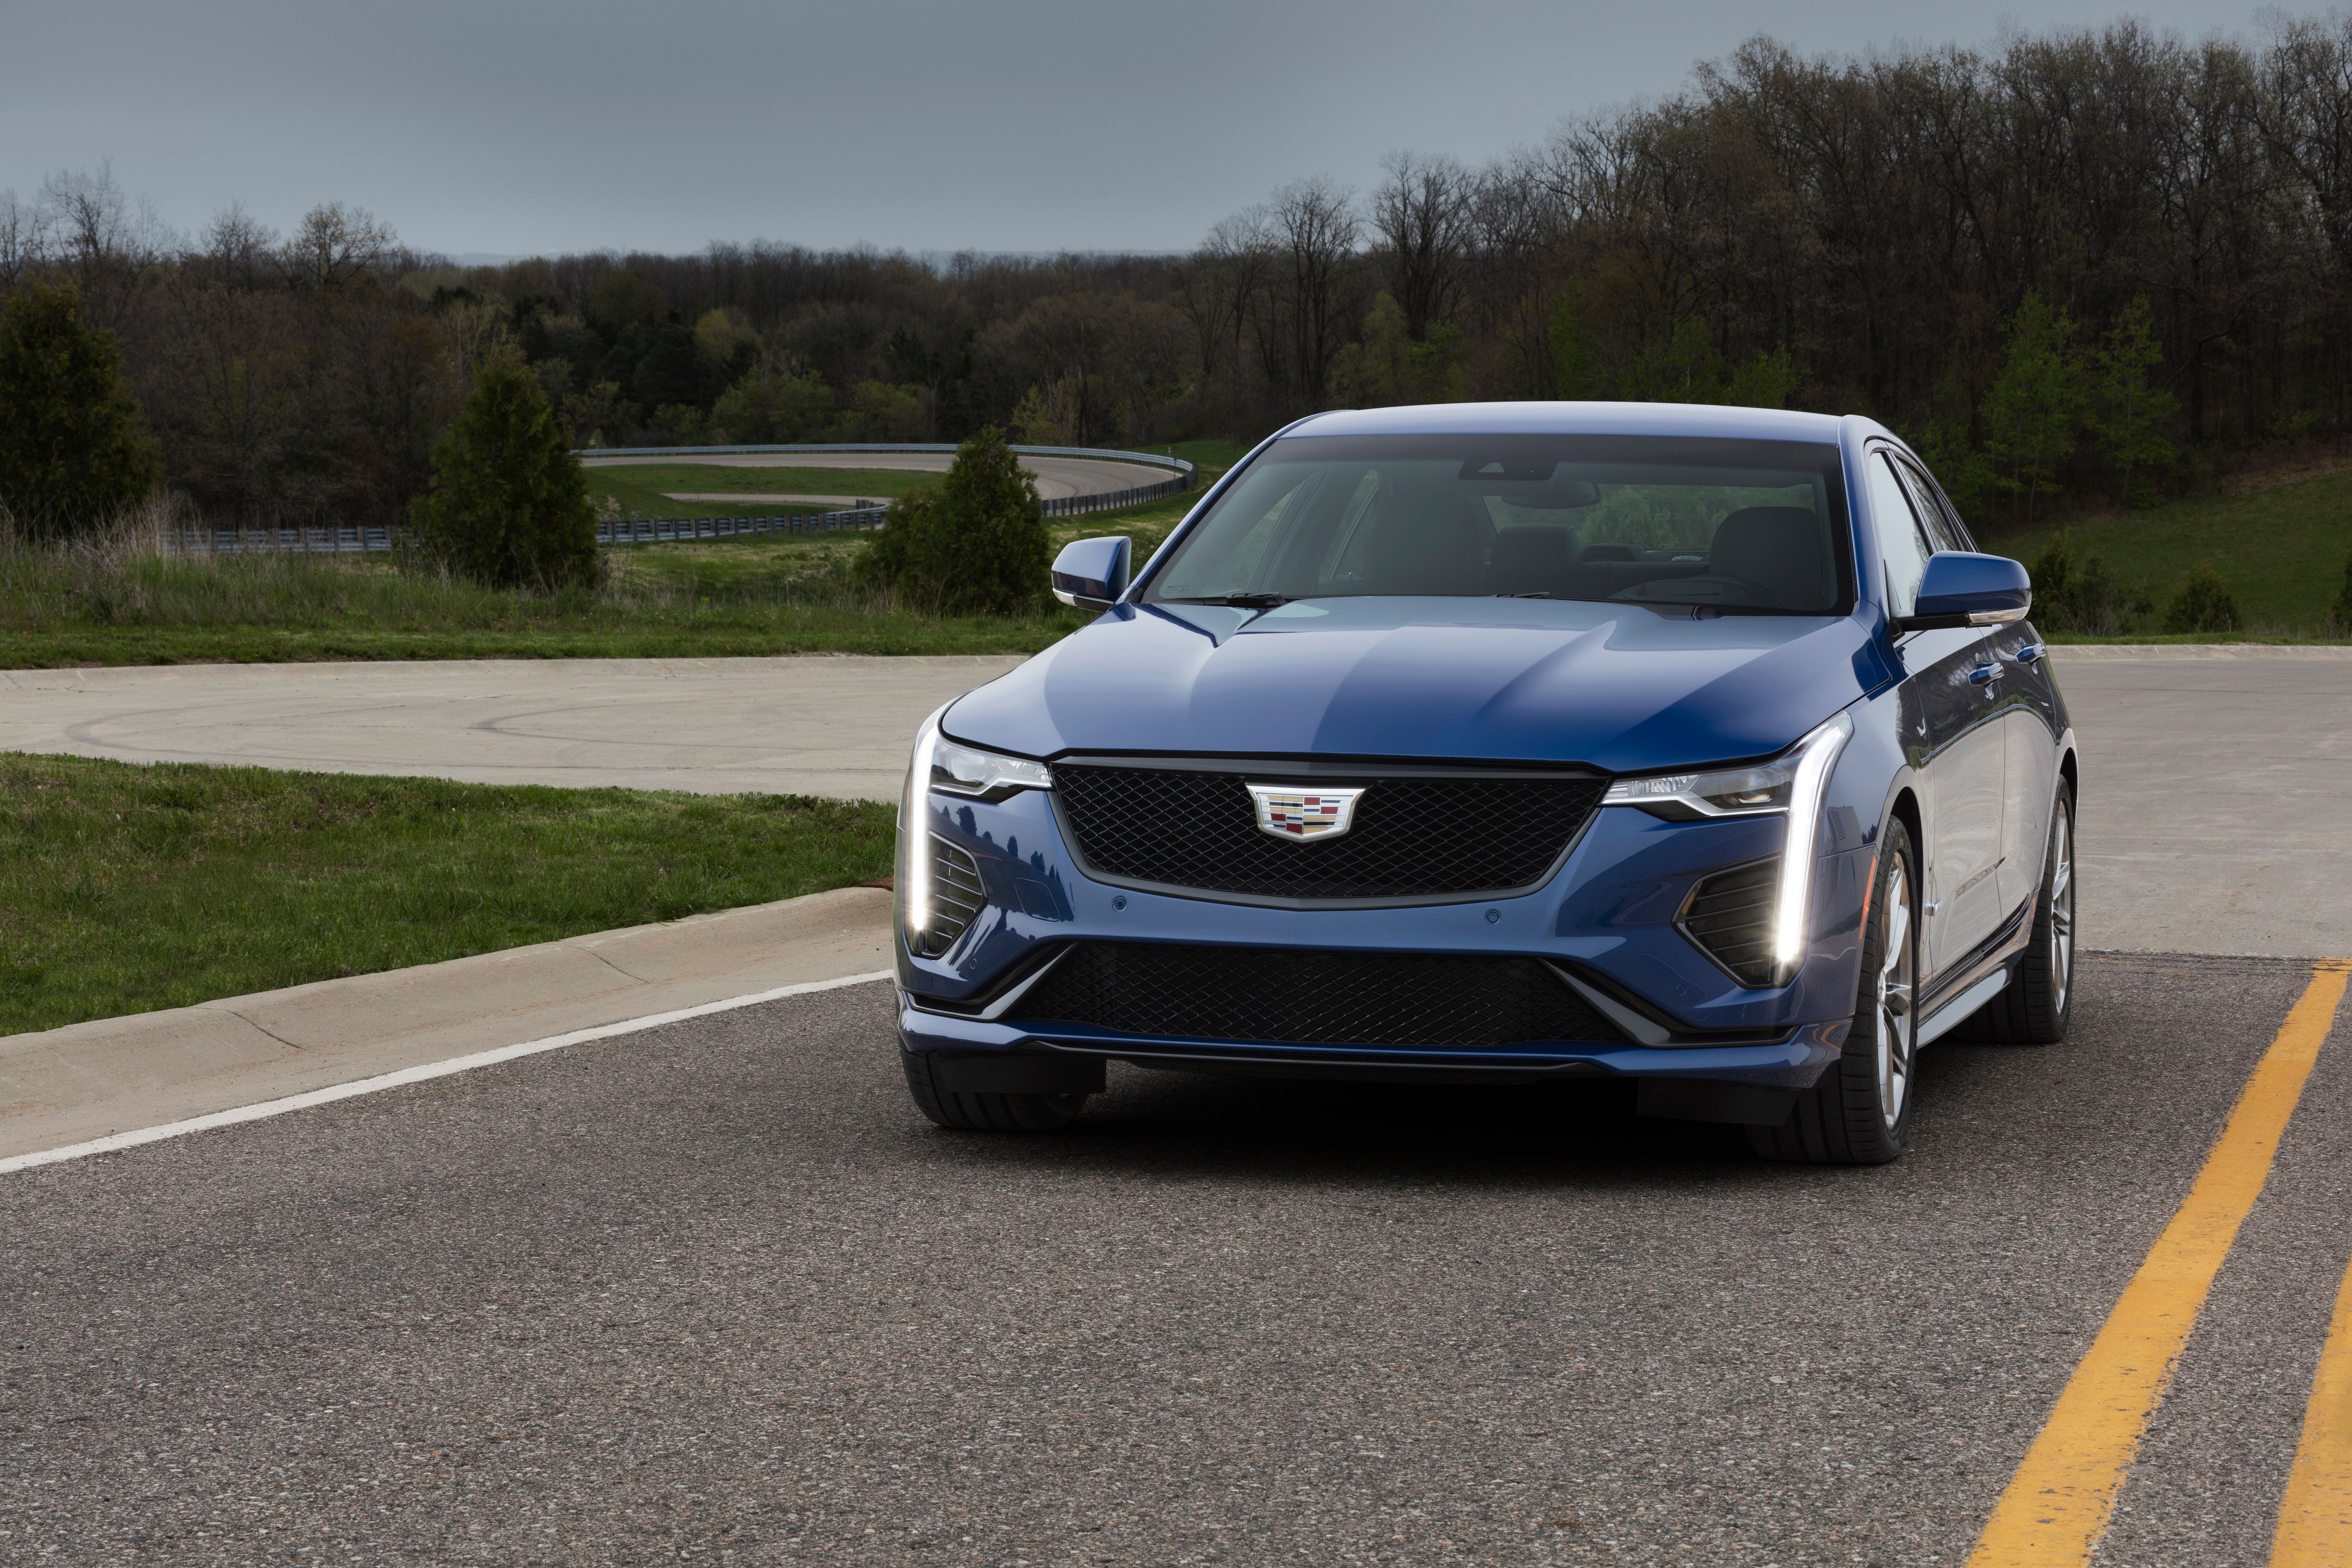 2018 - 2019 Cadillac Just Revealed the CT4-V and CT5-V, and I’m Pissed